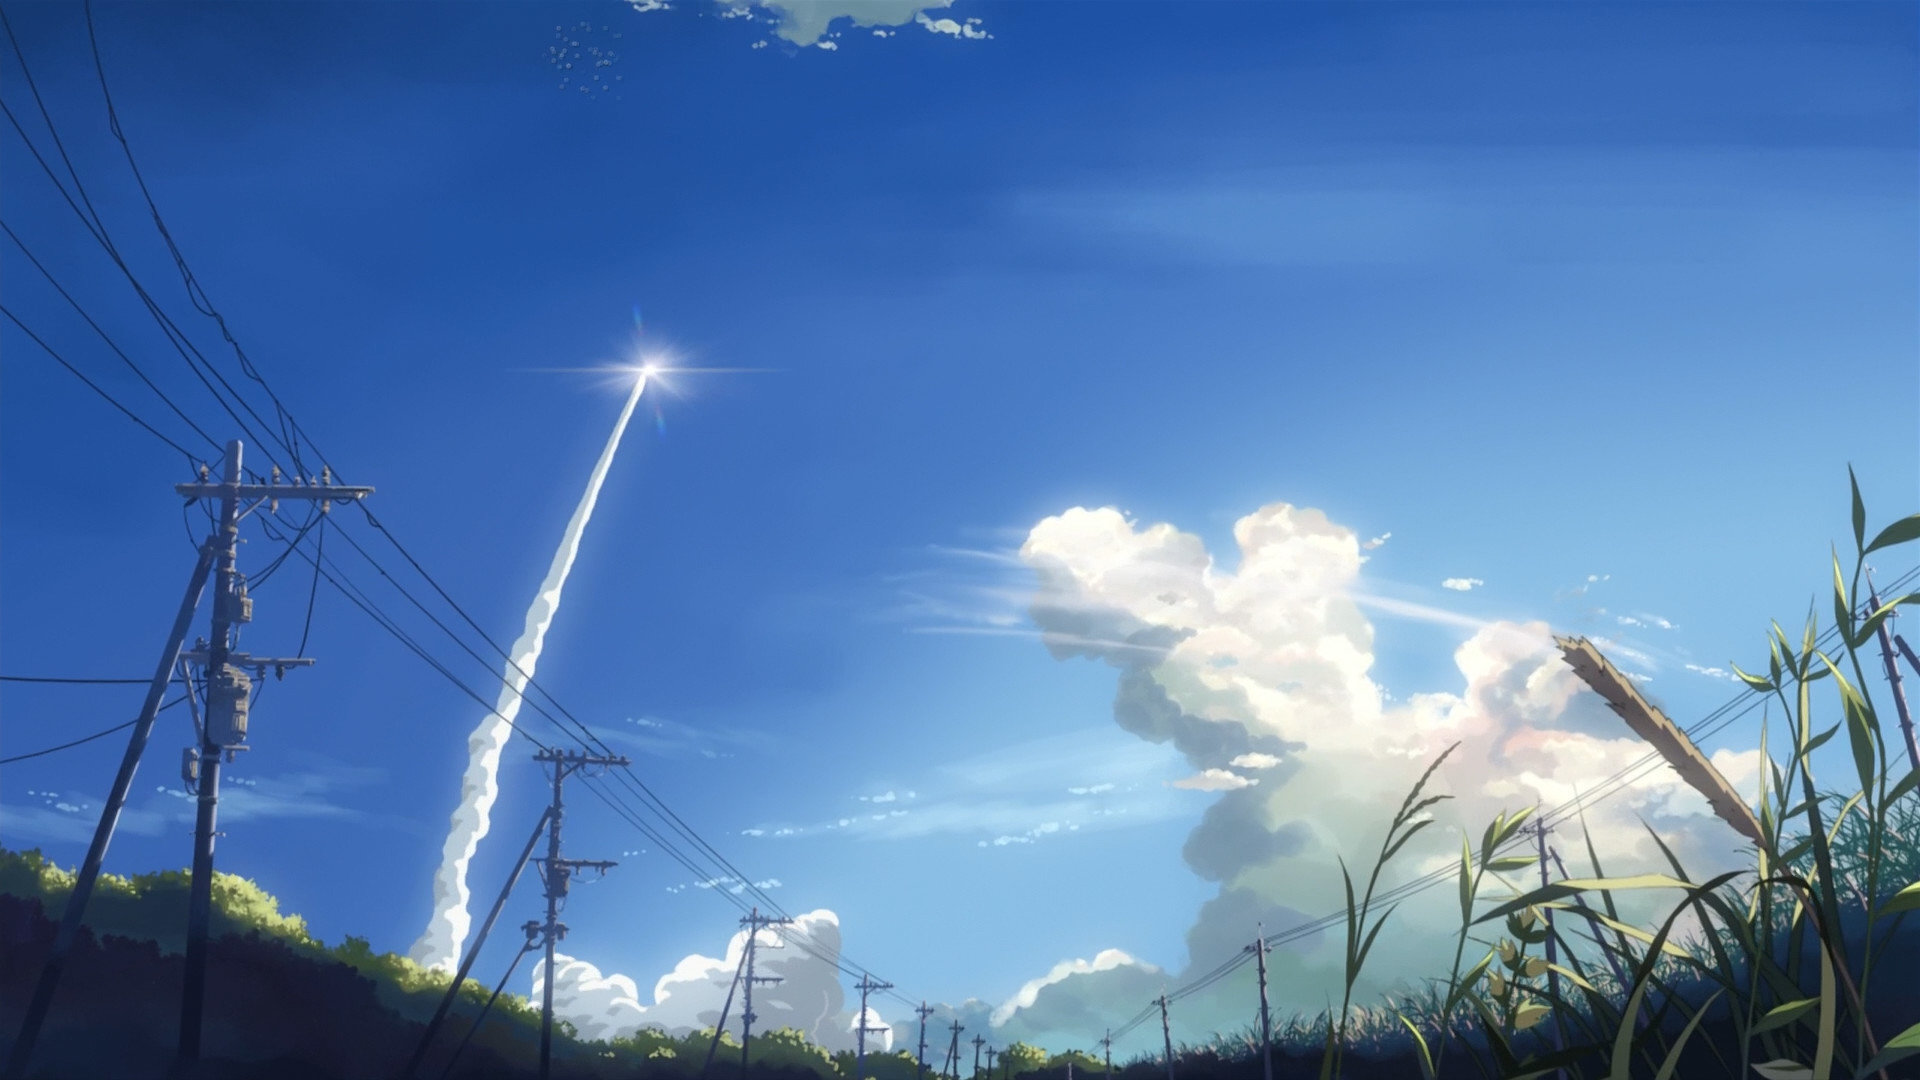 Download hd 1920x1080 5 (cm) Centimeters Per Second desktop background ID:90111 for free